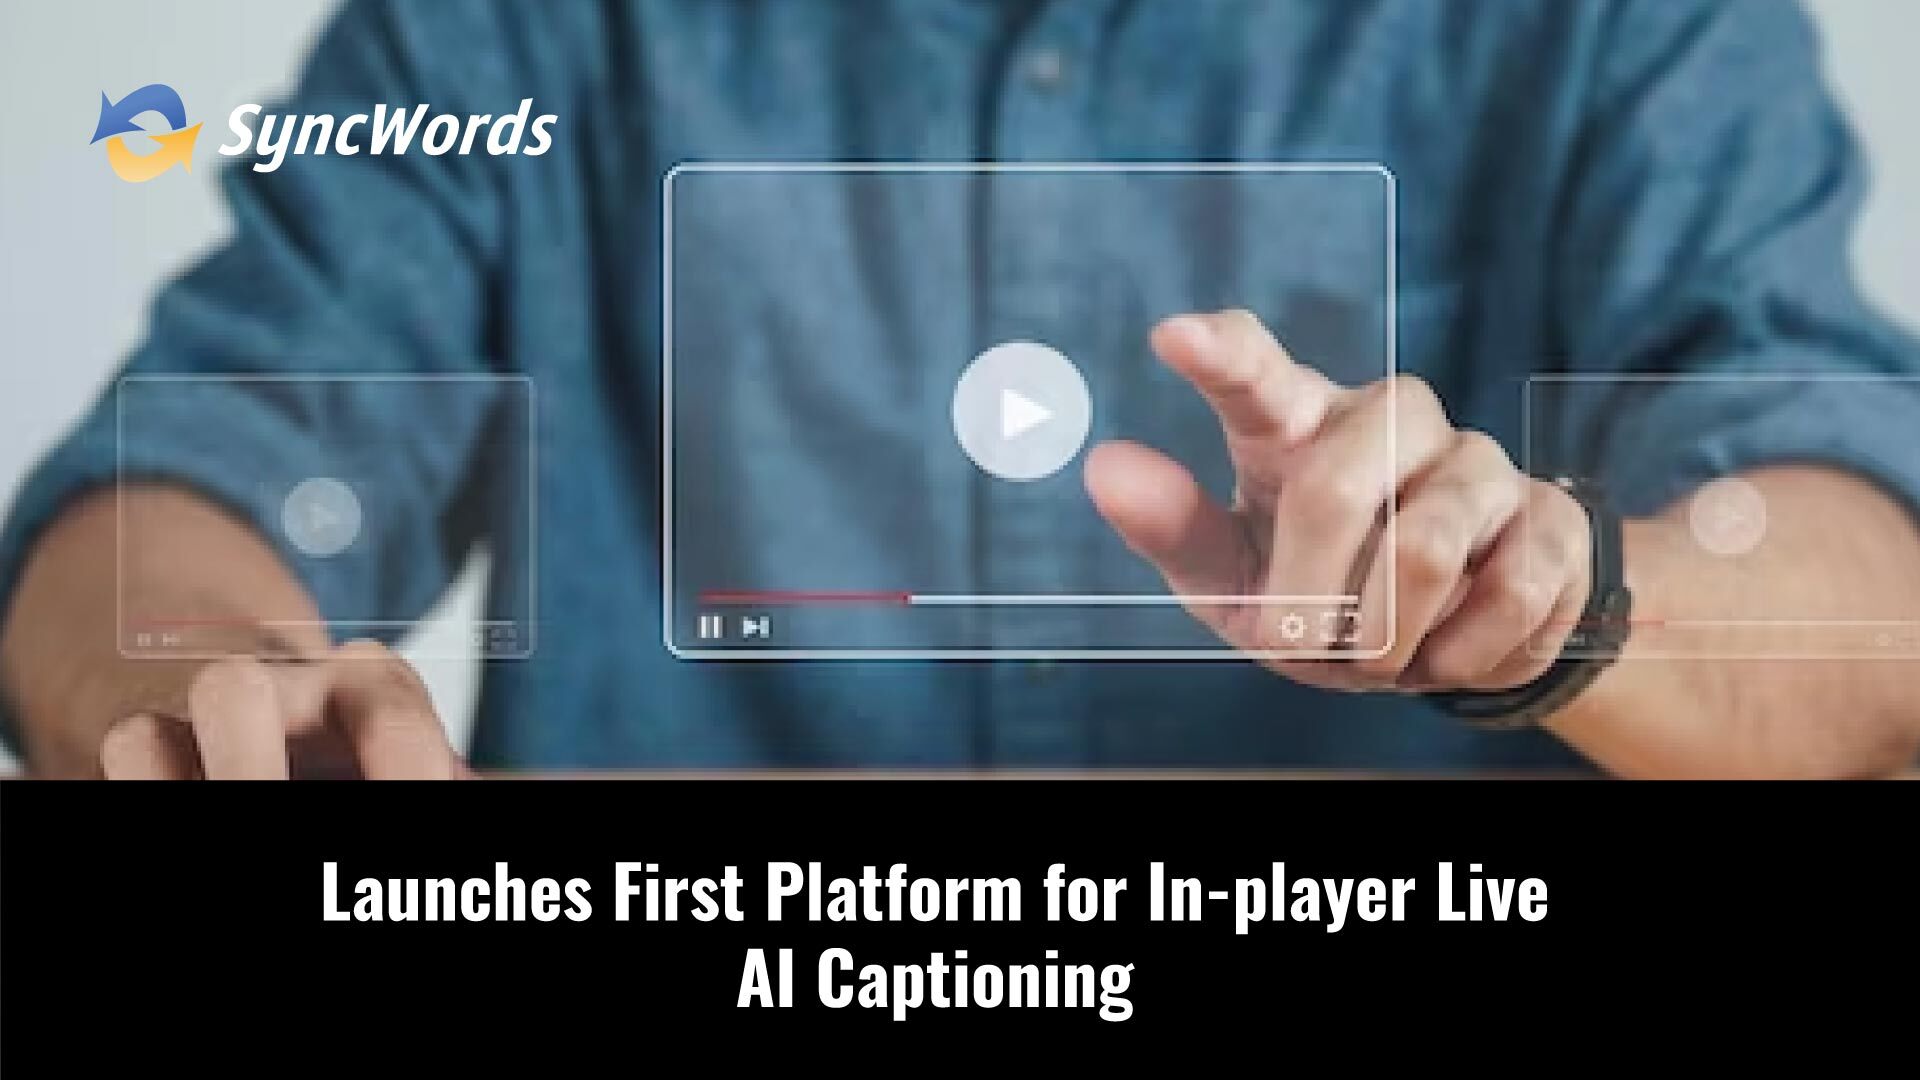 SyncWords Launches the World's First Platform for In-player Live AI Captioning, Subtitling, and Dubbing